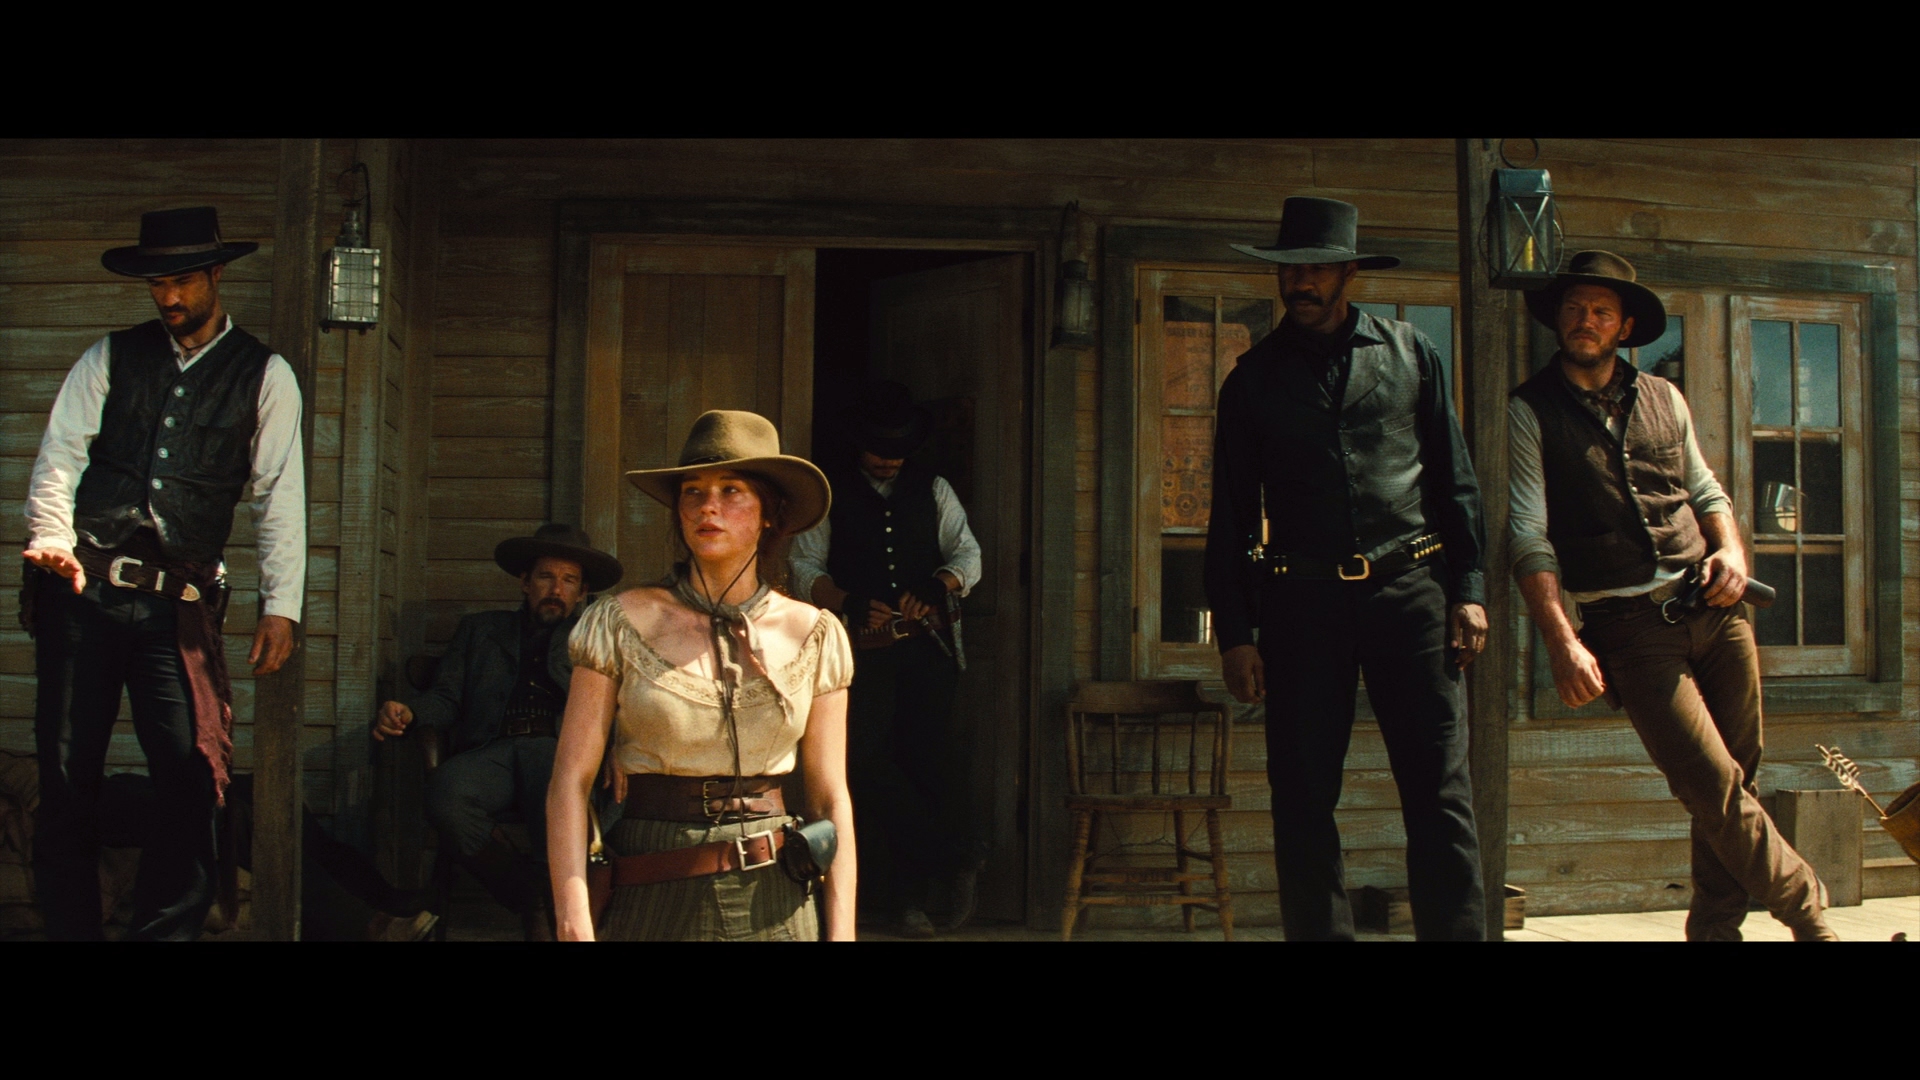 The Magnificent Seven (2016) Wallpapers